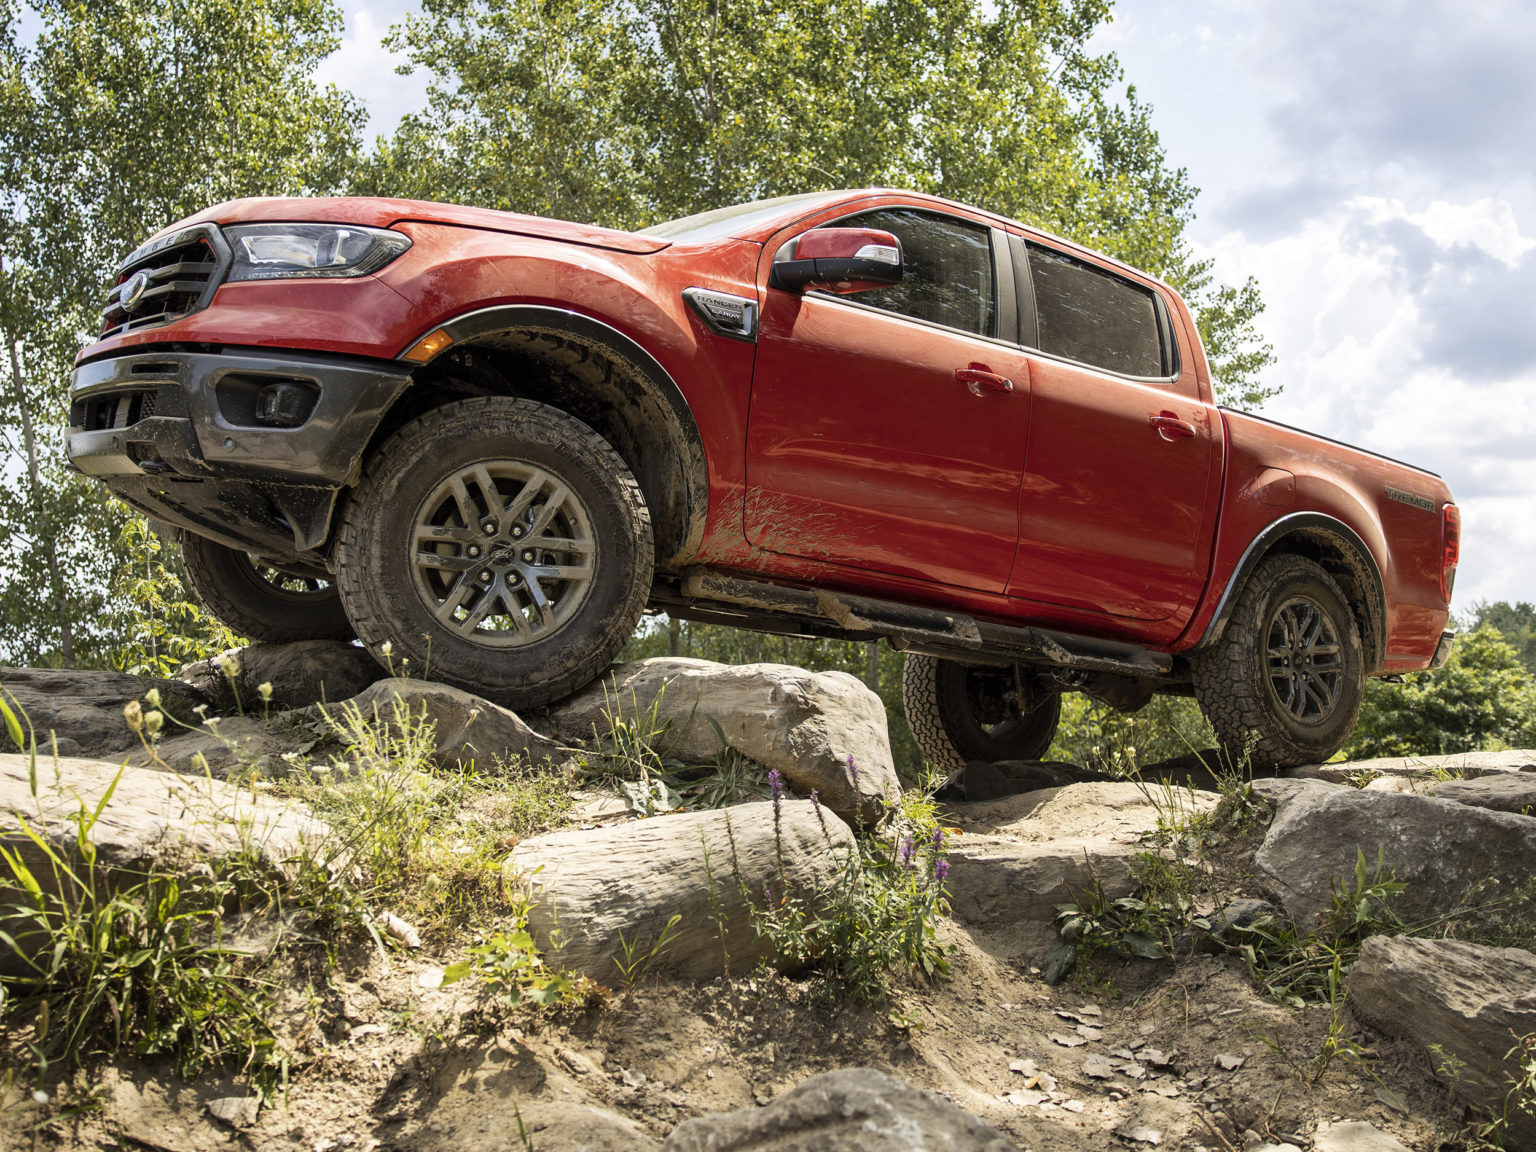 The popular Tremor Off-Road Package will be available on the 2021 Ford Ranger.